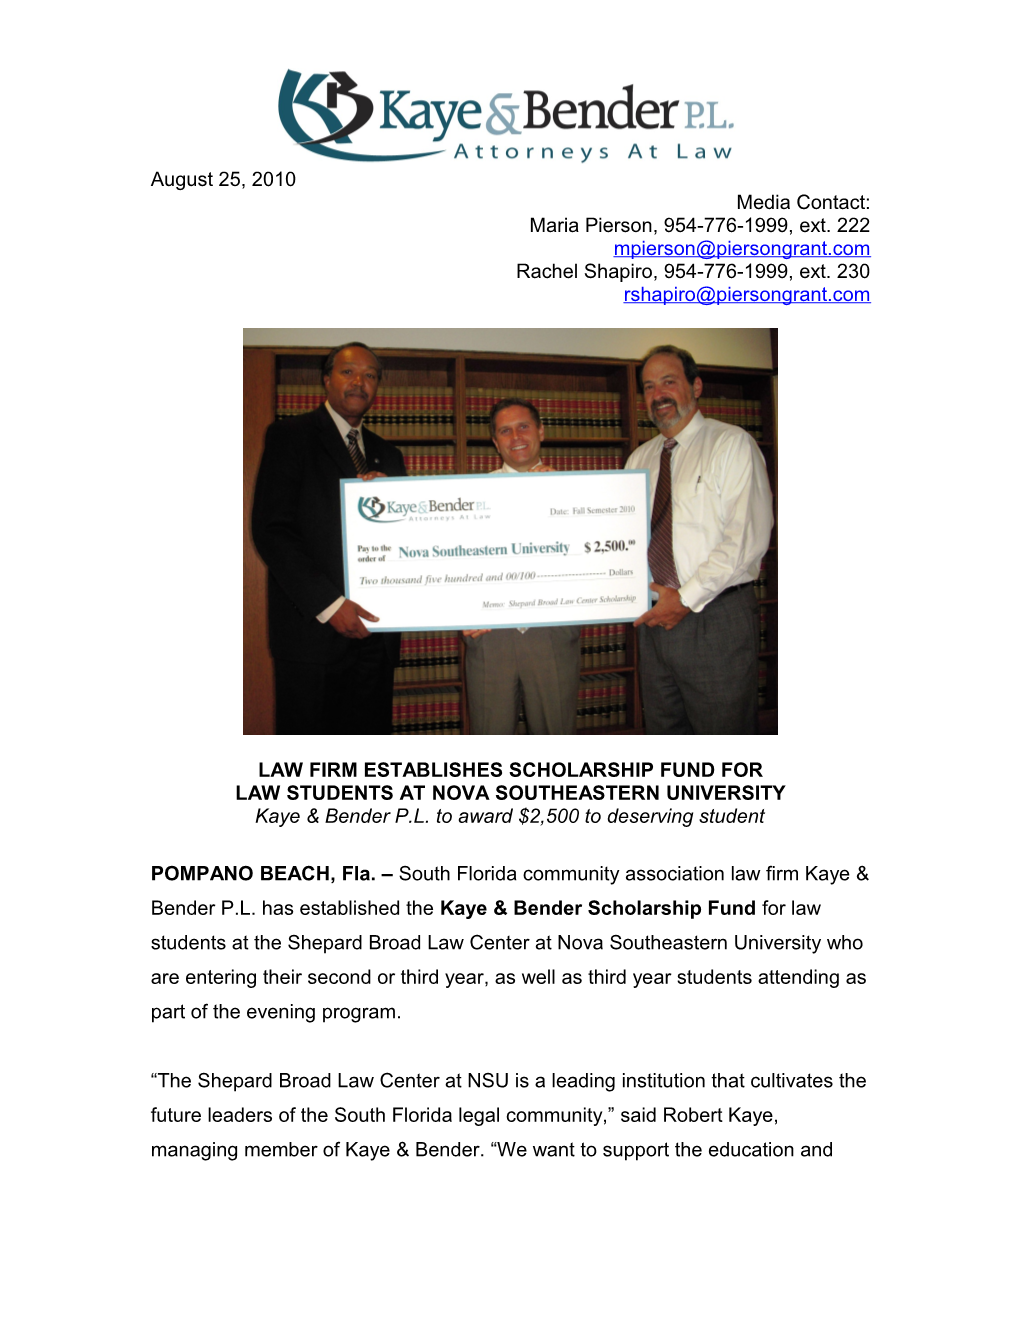 Law Firm Establishes Scholarship Fund For